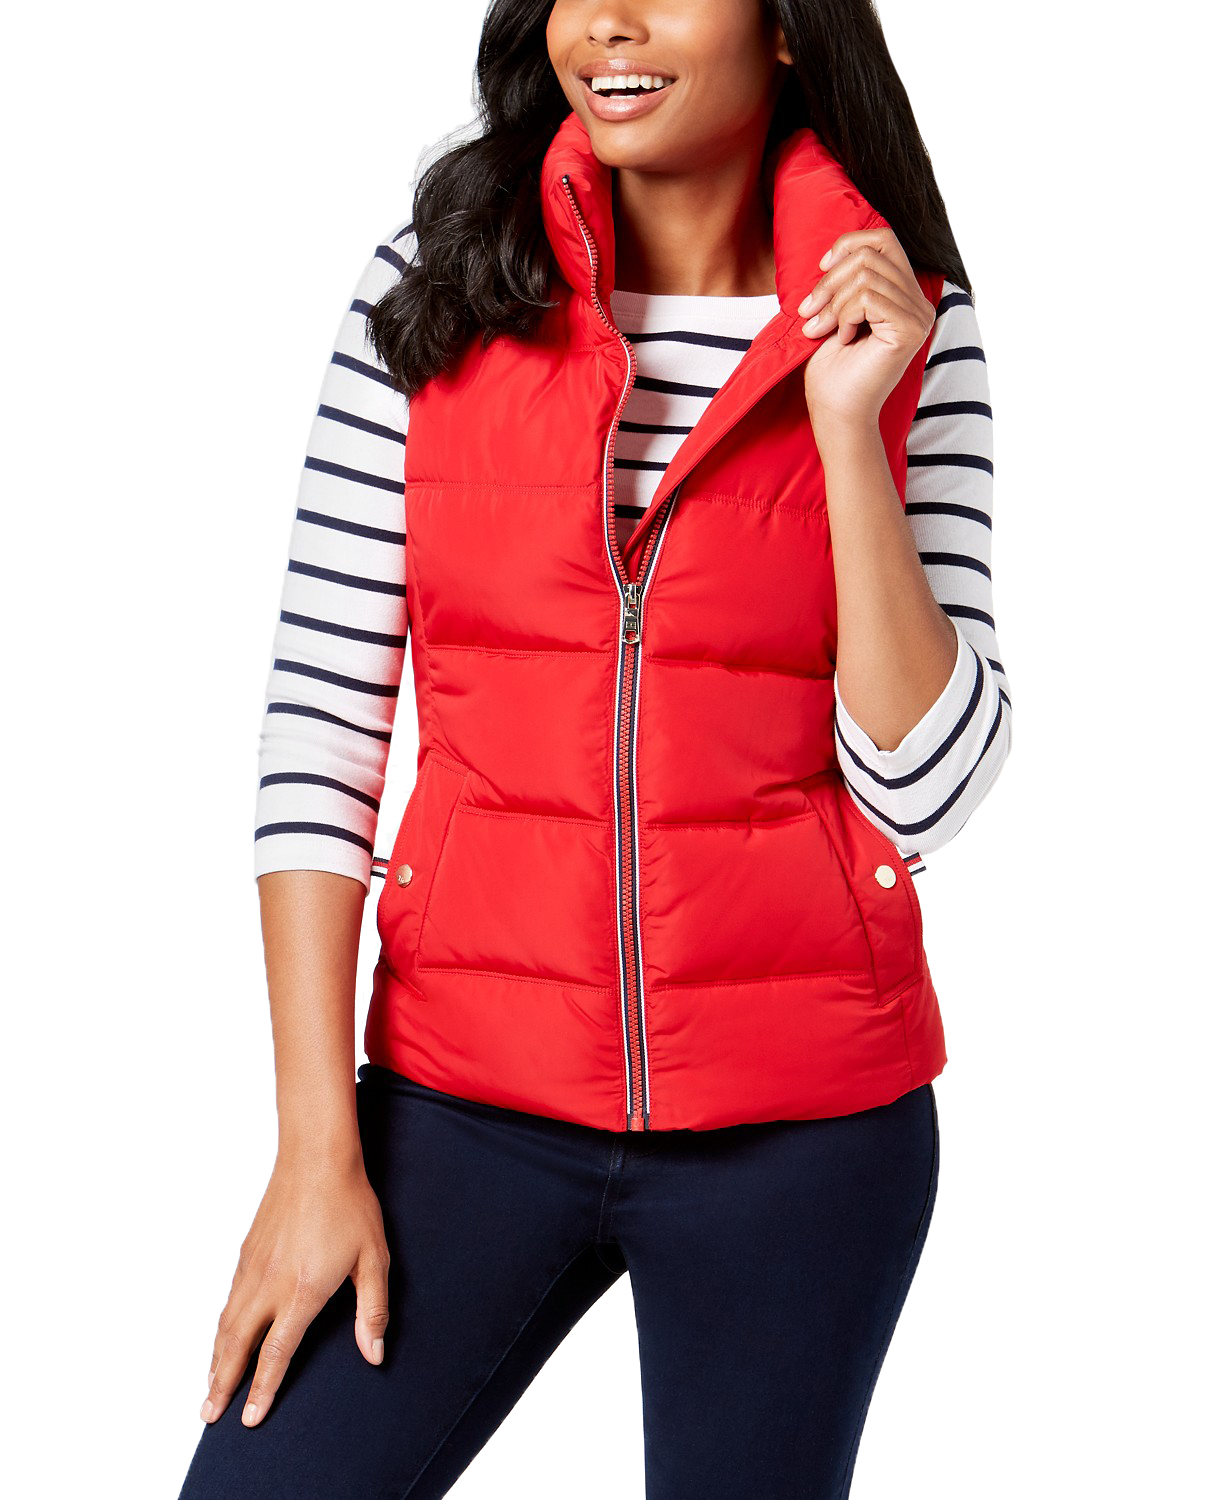 woocommerce-673321-2209615.cloudwaysapps.com-tommy-hilfiger-womens-red-puffer-vest